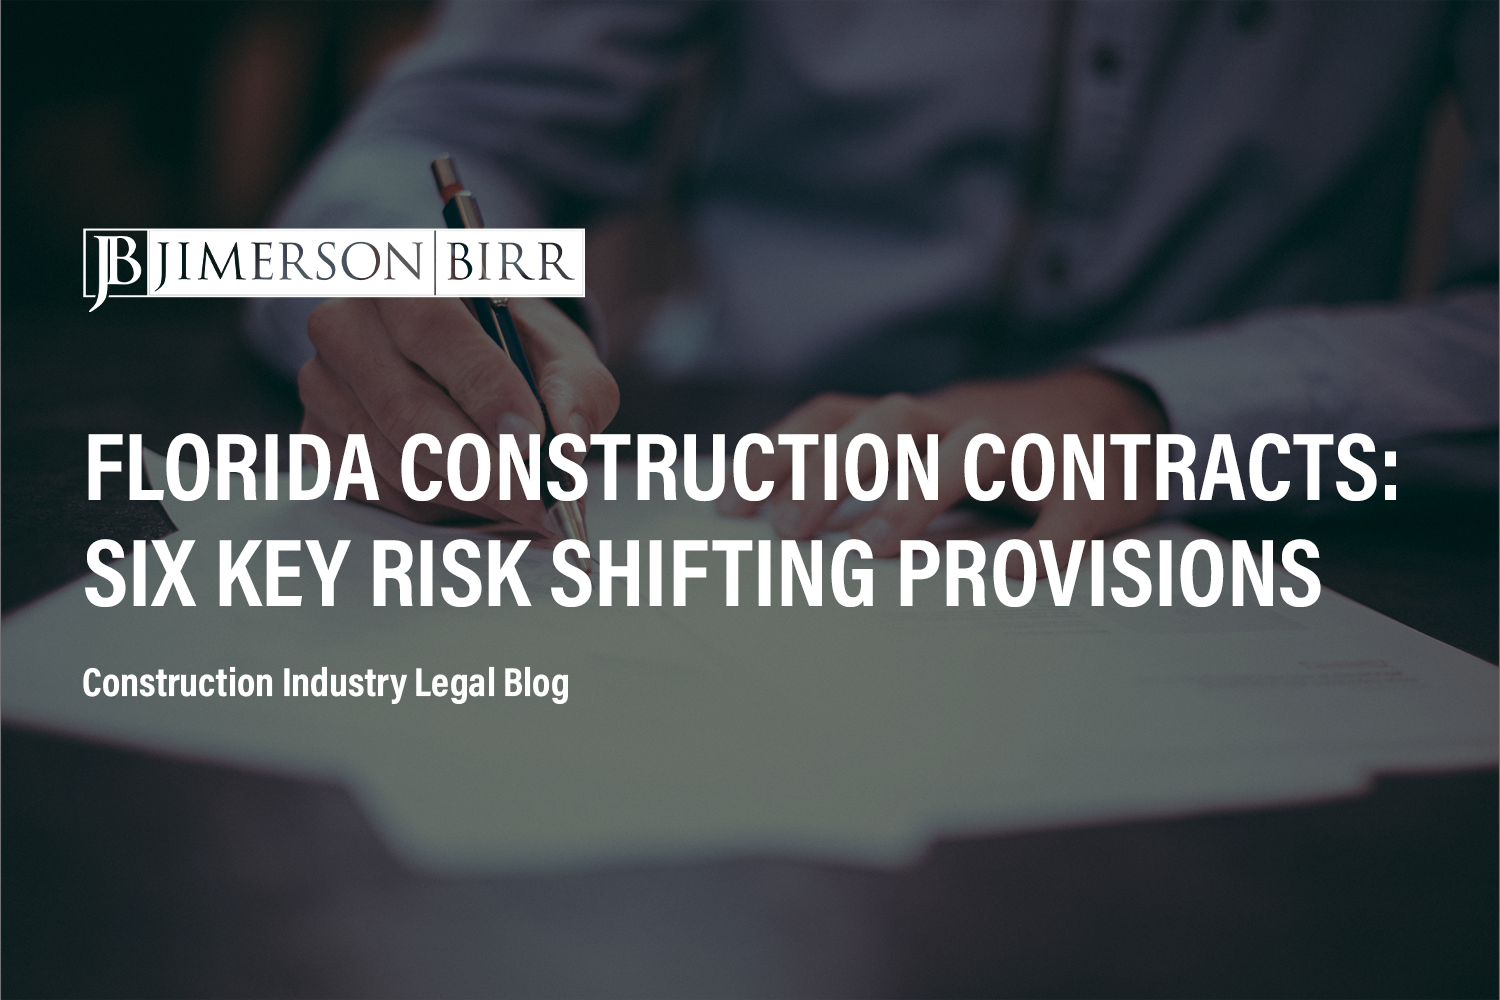 Florida Construction Contracts: Six Key Risk Shifting Provisions